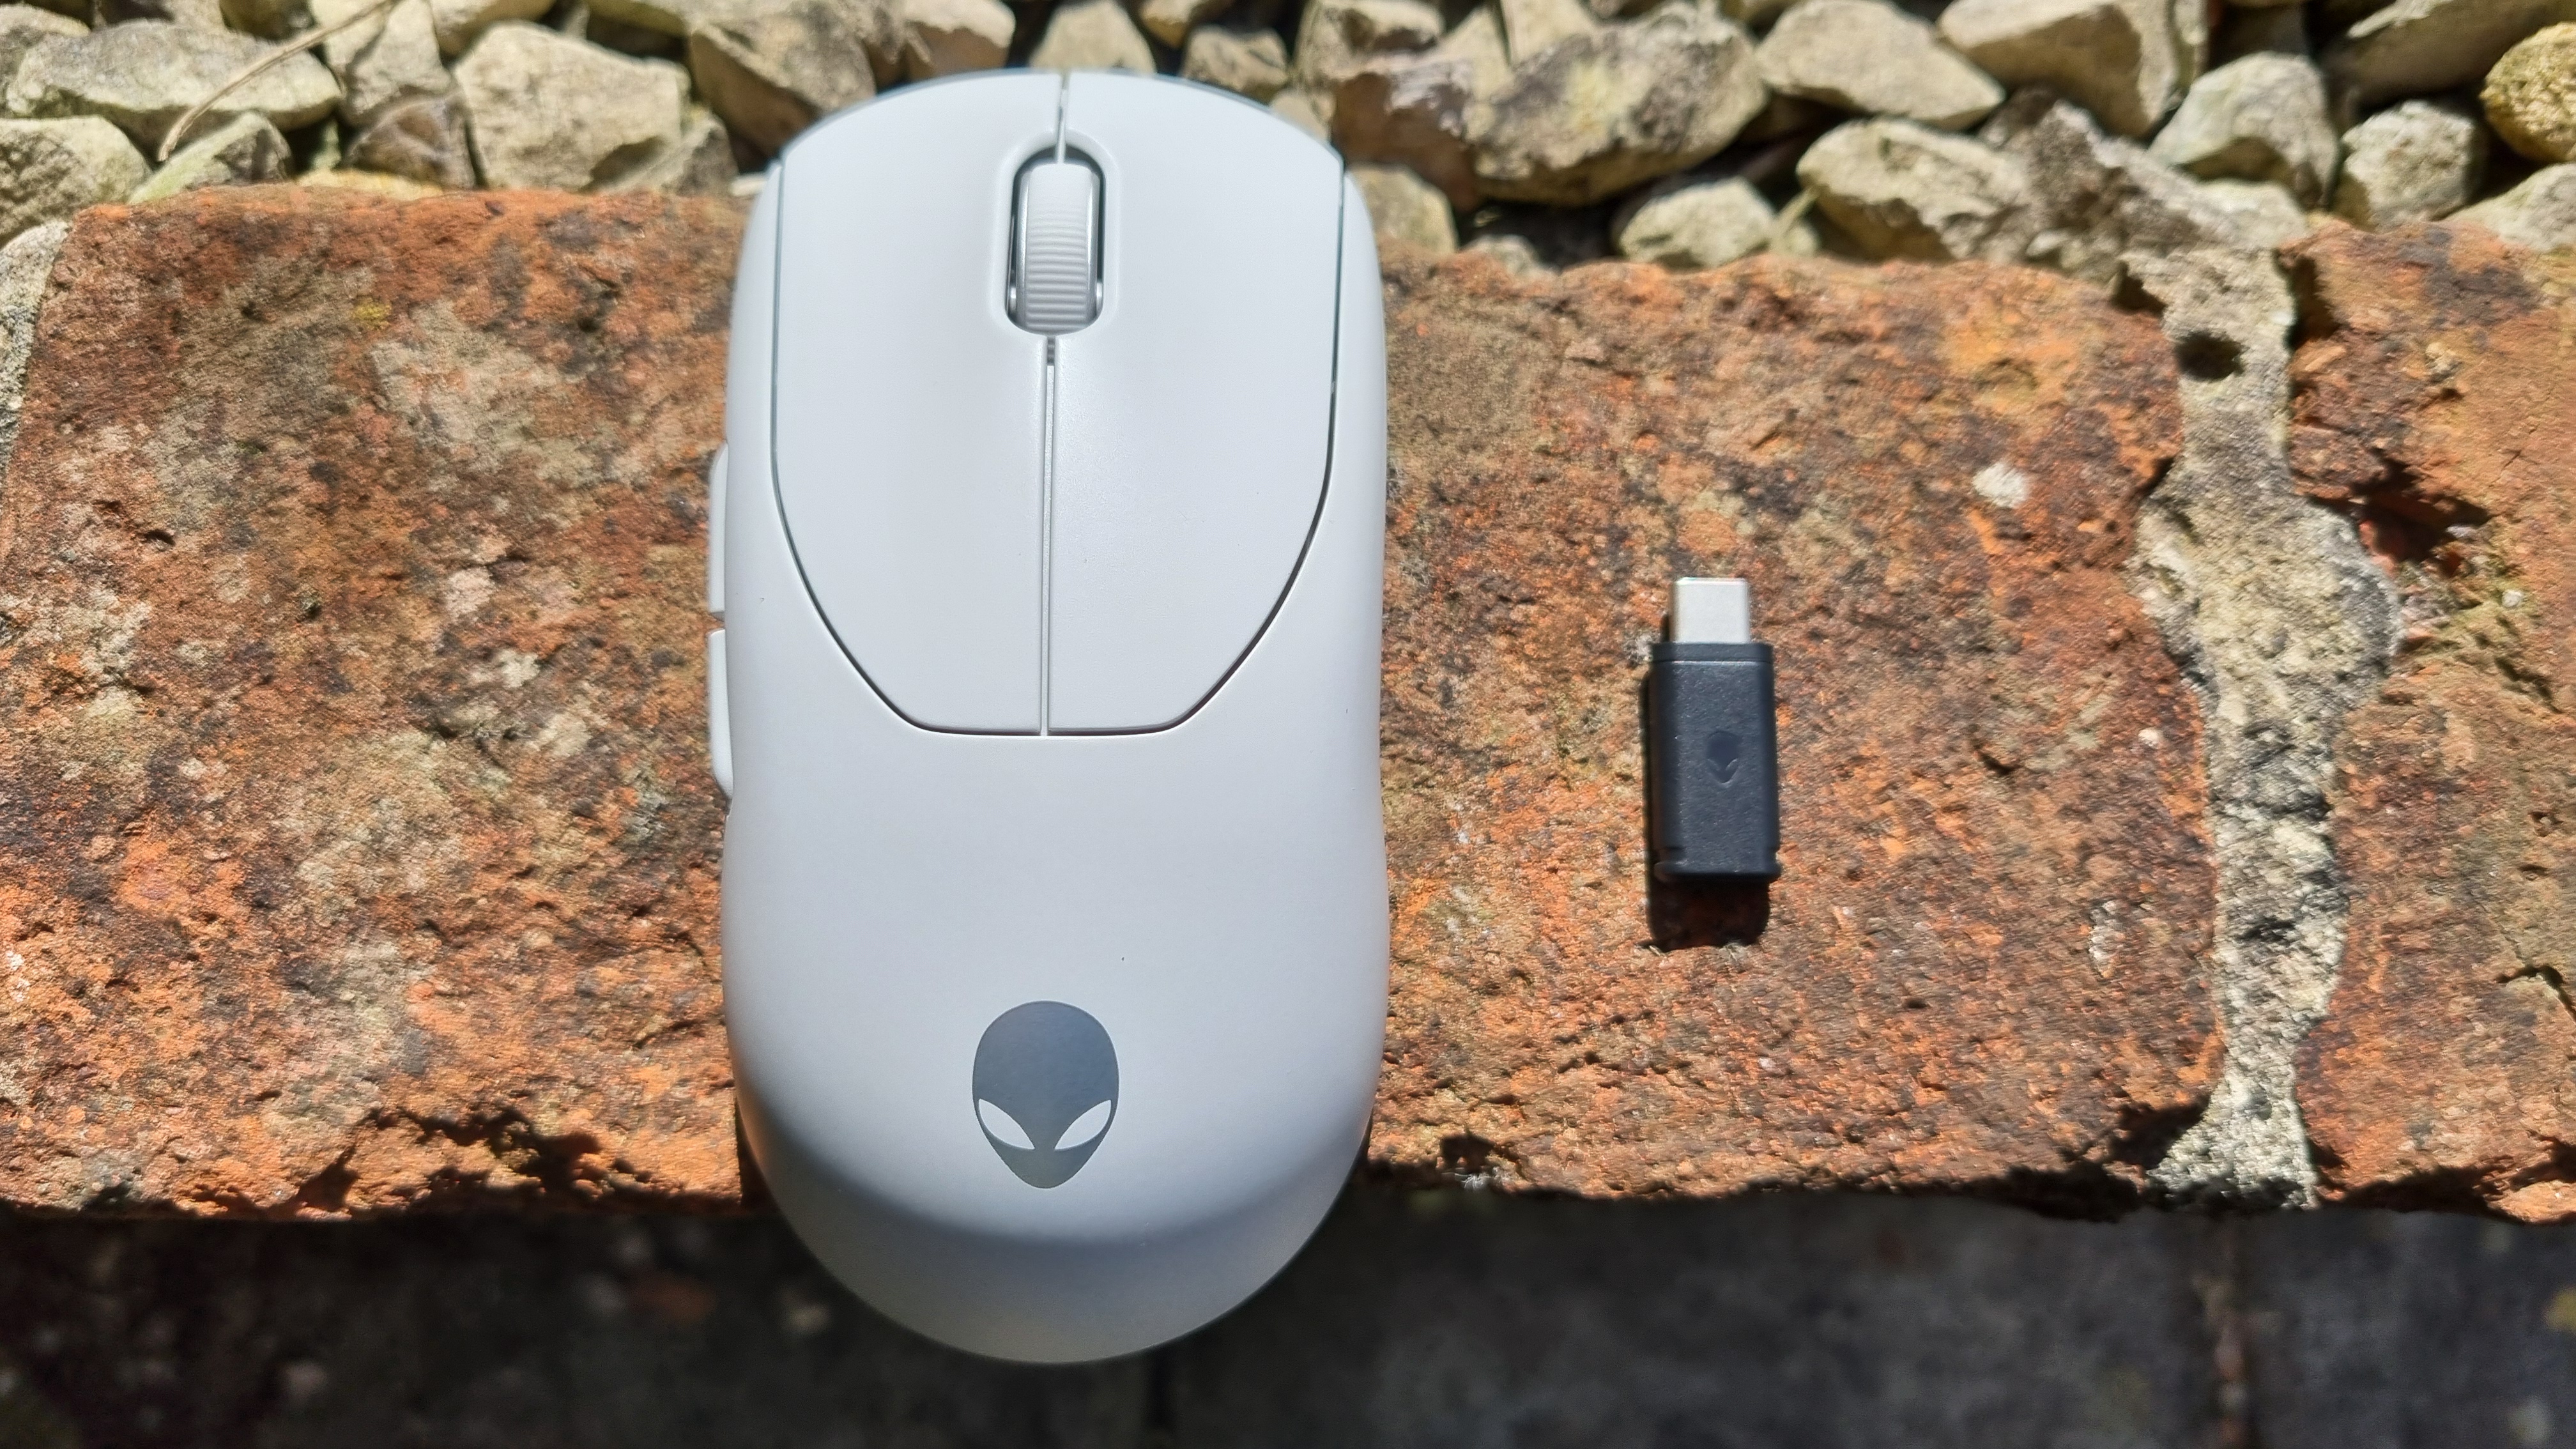 The Alienware Pro Wireless Gaming Mouse, side by side with its wireless receiver